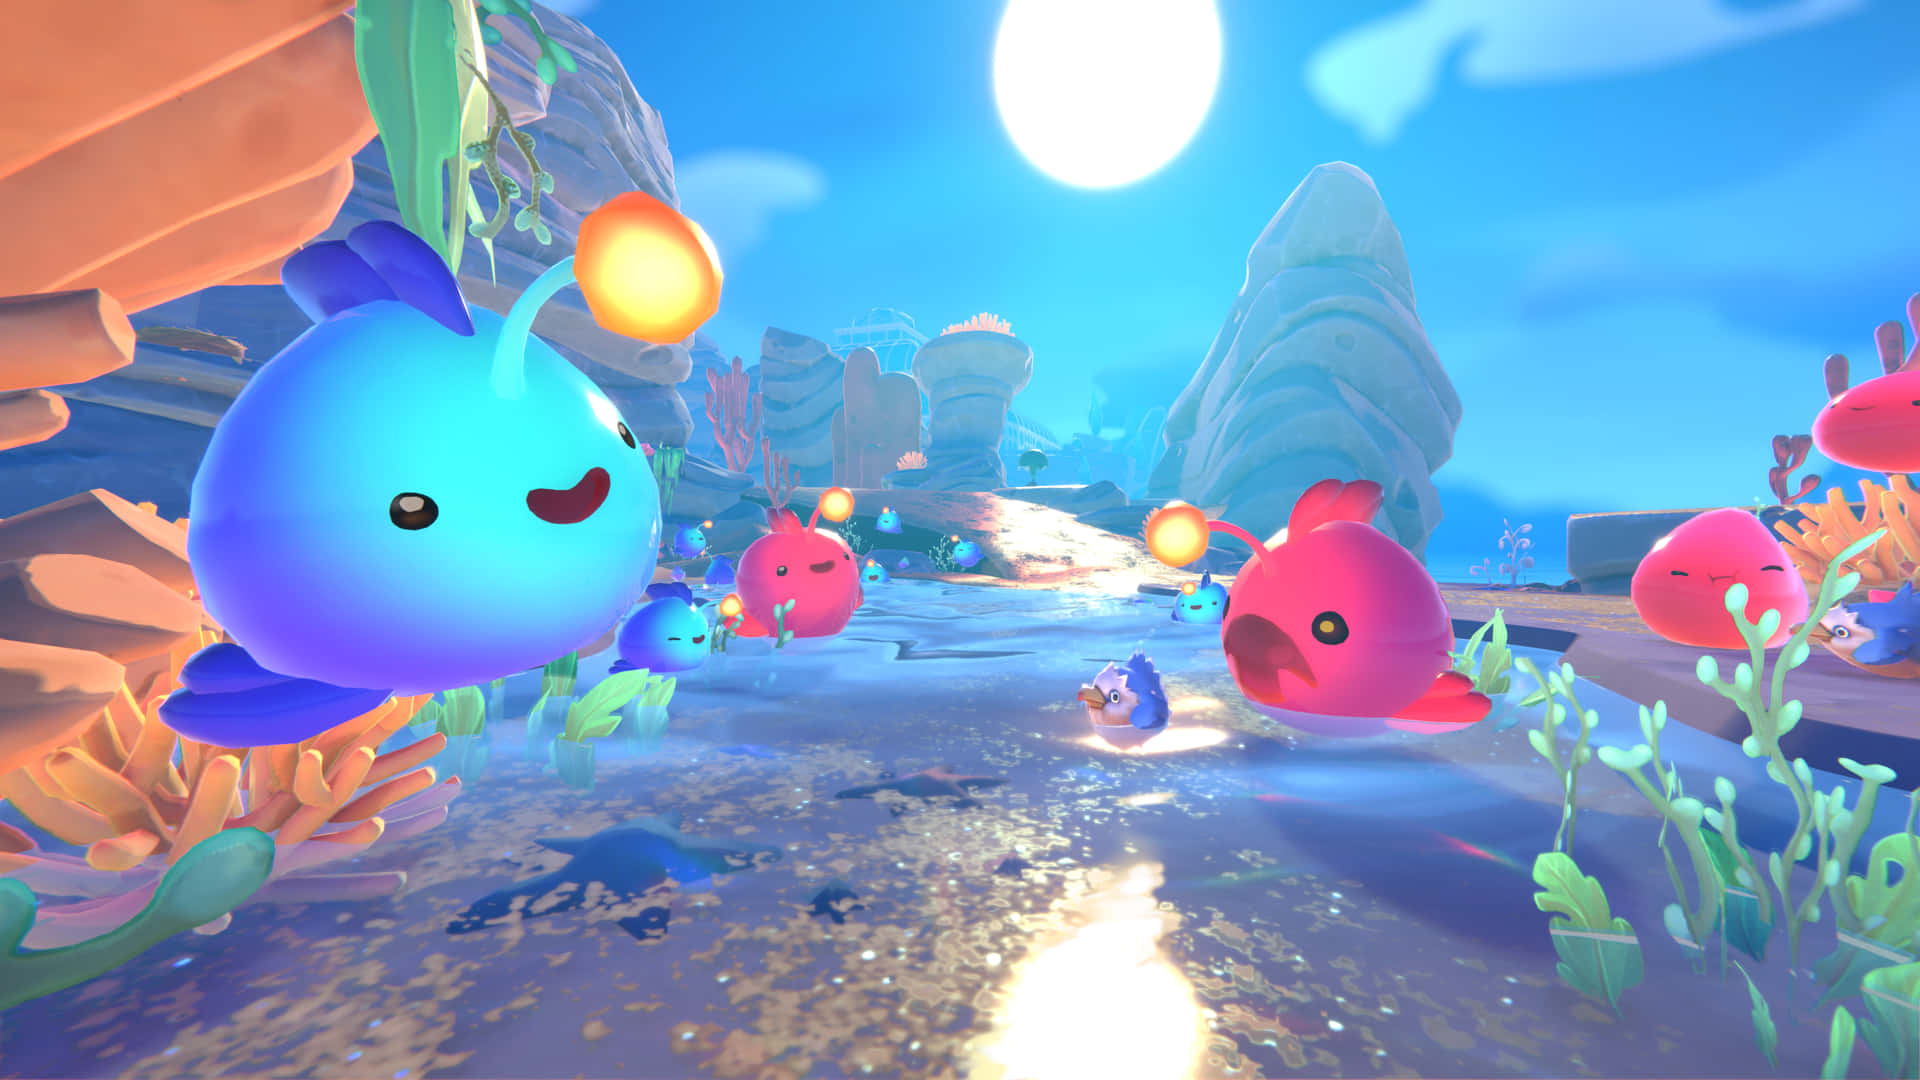 "Live and explore a world of slimes in Slime Rancher!" Wallpaper